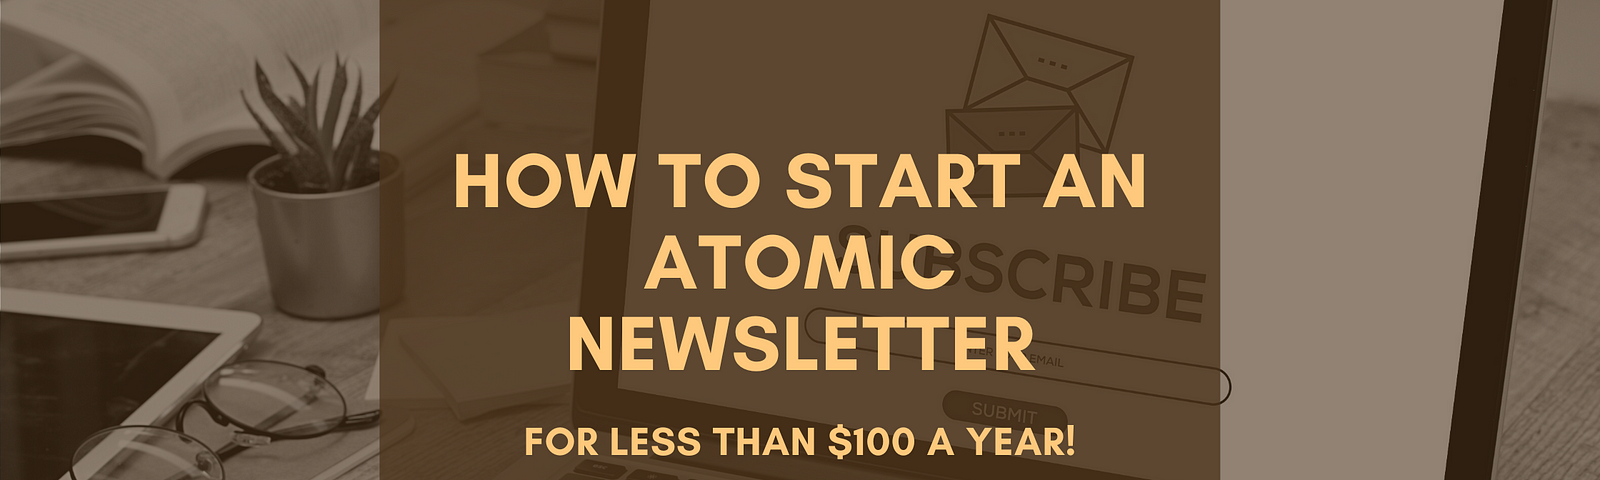 How to Start an Atomic Newsletter for Less Than $100 a Year!